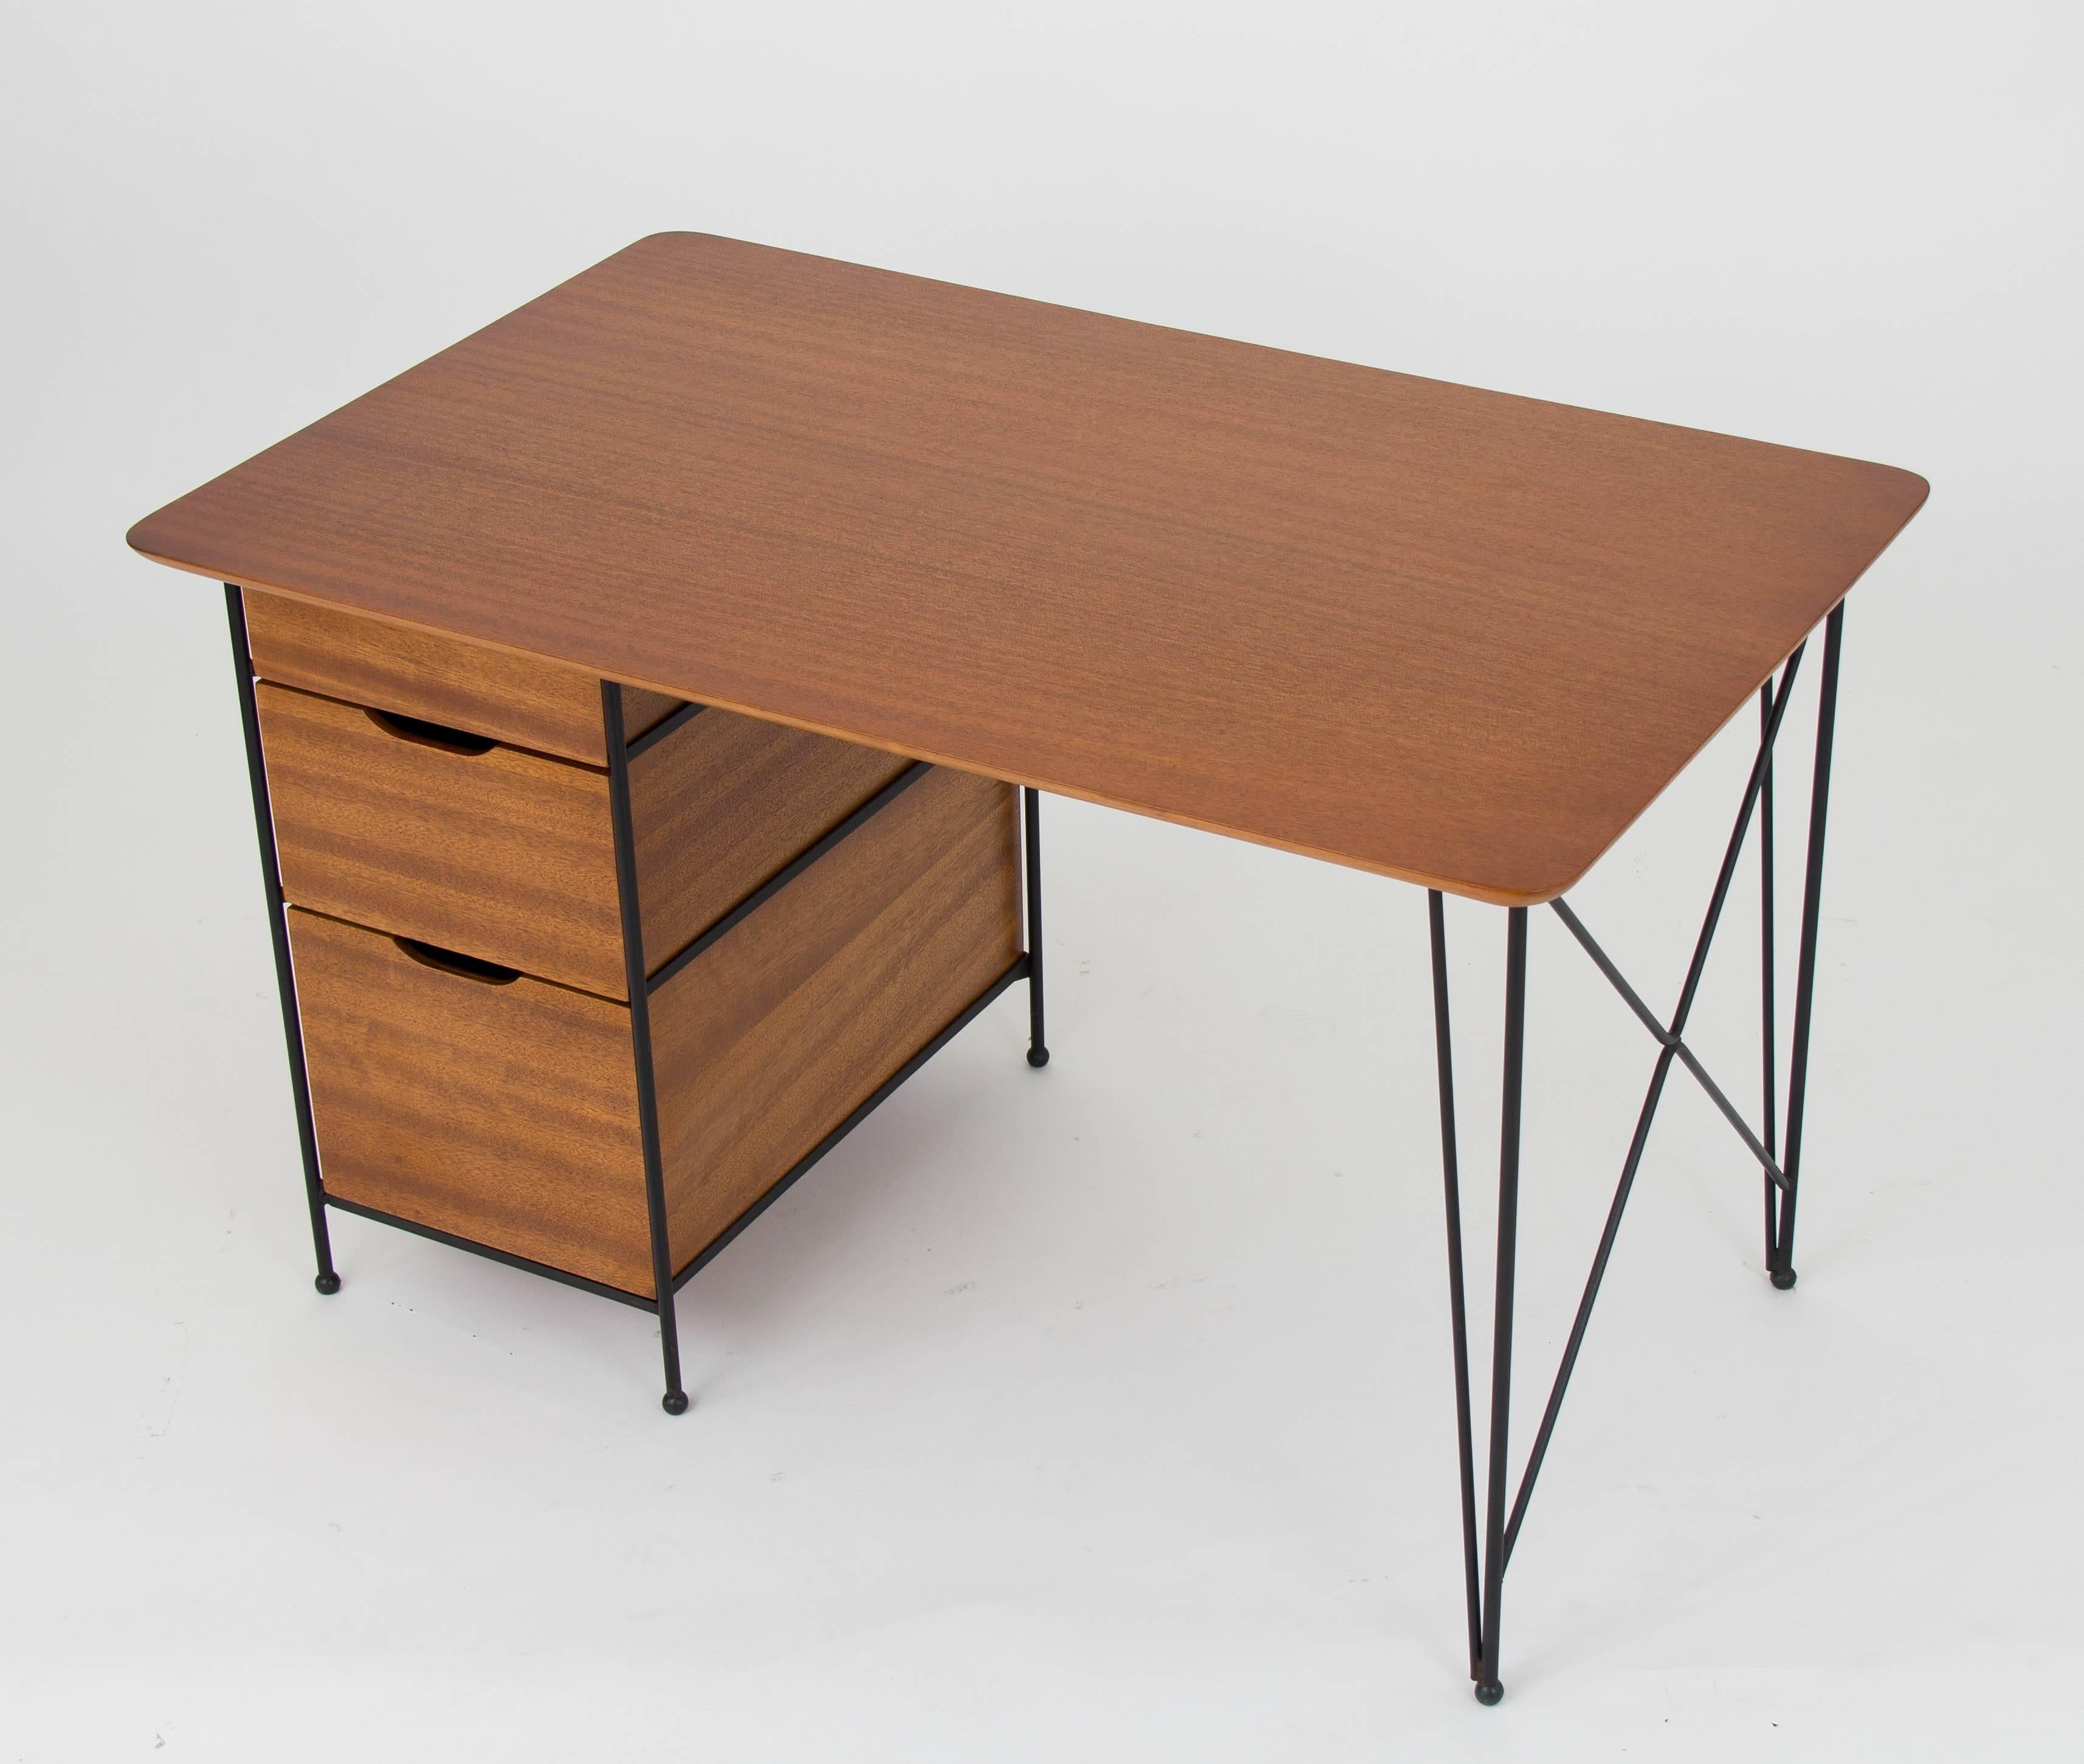 Modernist Desk in Mahogany and Enameled Steel by Vista of California 1